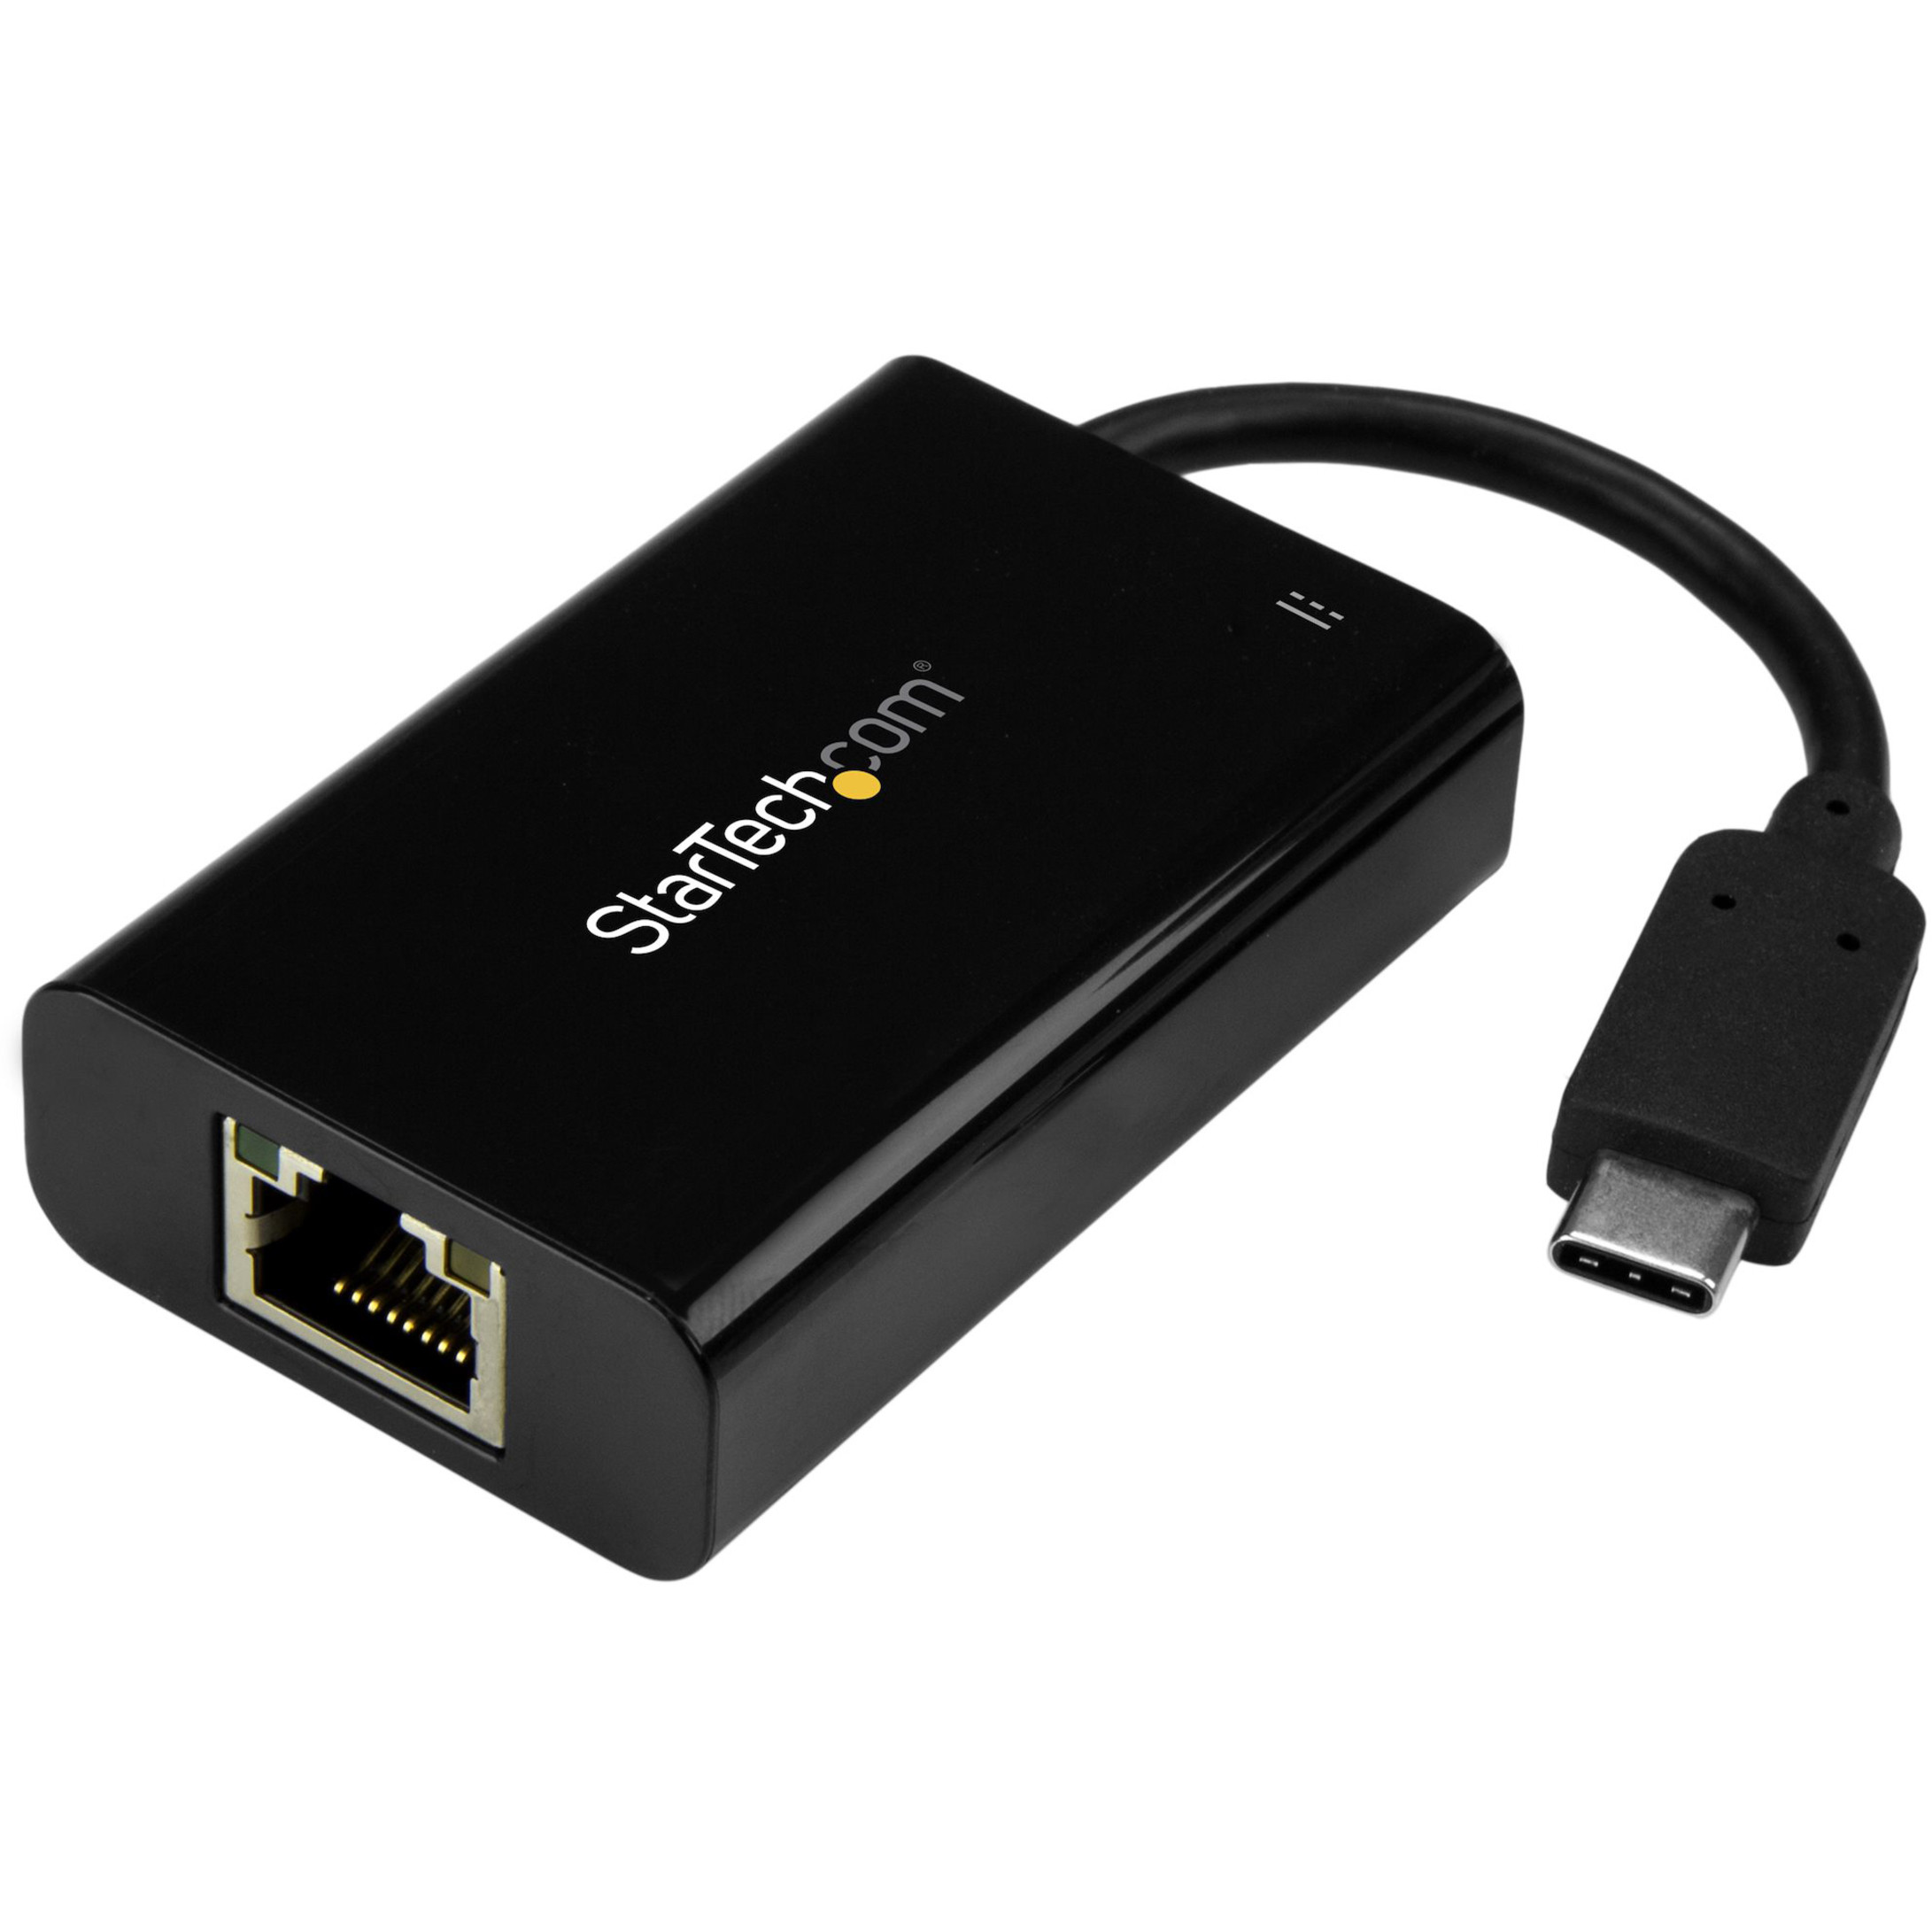 Startech .com USB C to Gigabit Ethernet Adapter/Converter w/PD 2.01Gbps USB 3.1 Type C to RJ45/LAN Network w/Power Delivery Pass ThroughU… US1GC30PD